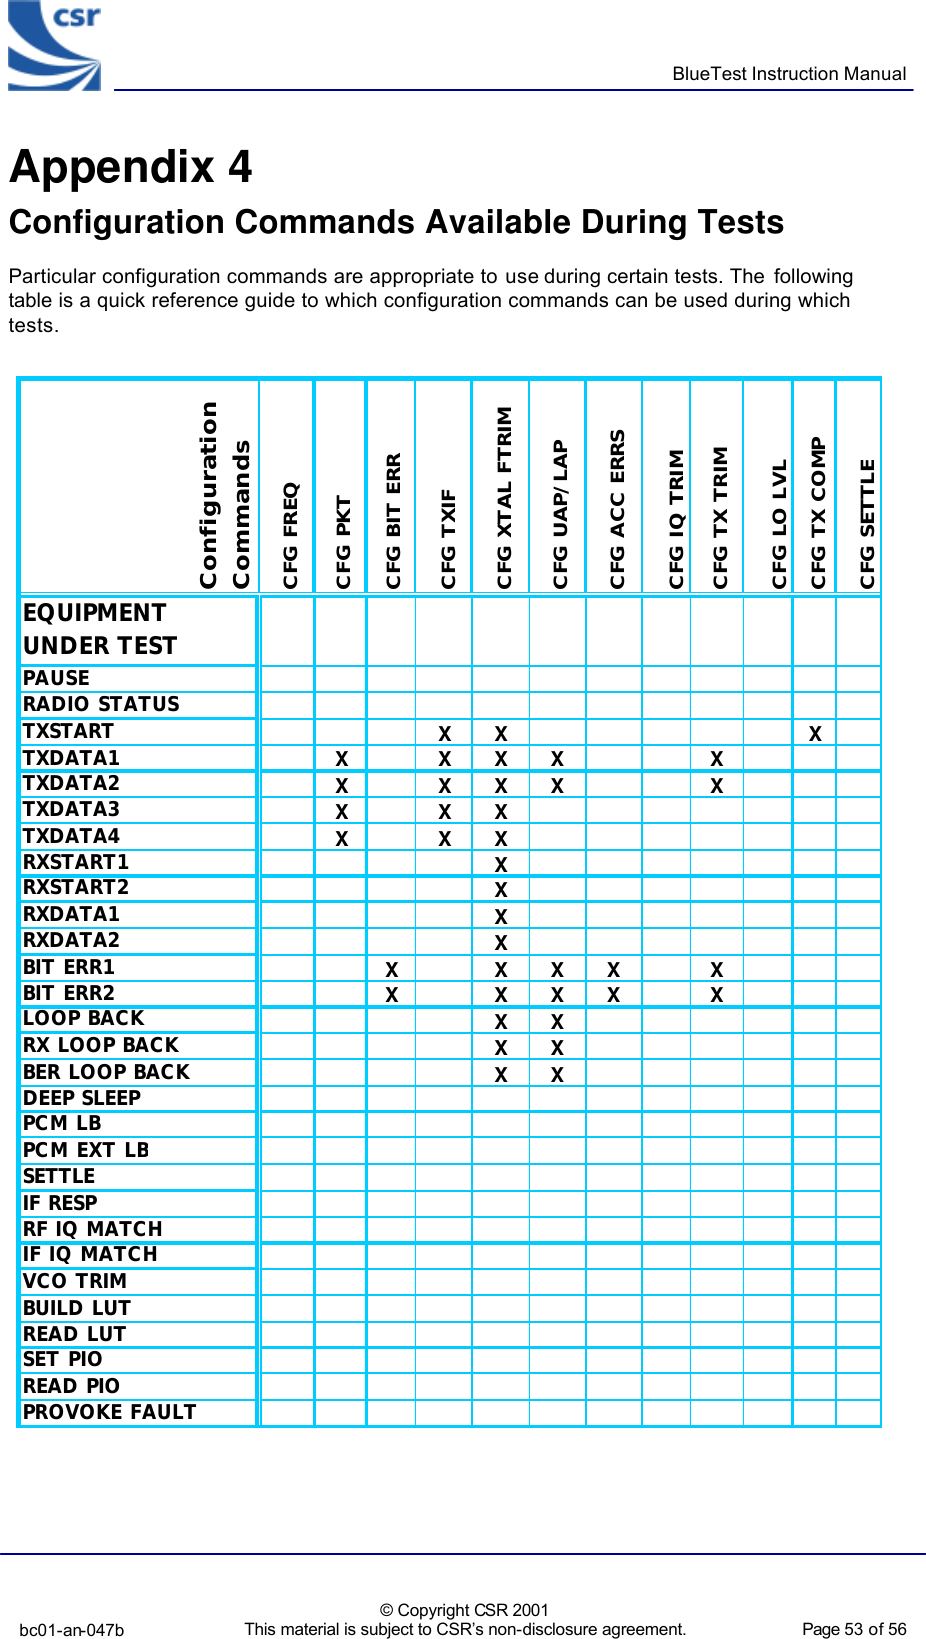      BlueTest Instruction Manual  bc01-an-047b  © Copyright CSR 2001 This material is subject to CSR’s non-disclosure agreement.   Page 53 of 56  BlueCoreTM01 Appendix 4 Configuration Commands Available During Tests Particular configuration commands are appropriate to use during certain tests. The following table is a quick reference guide to which configuration commands can be used during which tests.   Configuration CommandsCFG FREQCFG PKTCFG BIT ERRCFG TXIFCFG XTAL FTRIMCFG UAP/LAPCFG ACC ERRSCFG IQ TRIMCFG TX TRIMCFG LO LVLCFG TX COMPCFG SETTLEEQUIPMENT UNDER TESTPAUSERADIO STATUSTXSTARTXXXTXDATA1XXXXXTXDATA2XXXXXTXDATA3XXXTXDATA4XXXRXSTART1XRXSTART2XRXDATA1XRXDATA2XBIT ERR1XXXXXBIT ERR2XXXXXLOOP BACKXXRX LOOP BACKXXBER LOOP BACKXXDEEP SLEEPPCM LBPCM EXT LBSETTLEIF RESPRF IQ MATCHIF IQ MATCHVCO TRIMBUILD LUTREAD LUTSET PIOREAD PIOPROVOKE FAULT